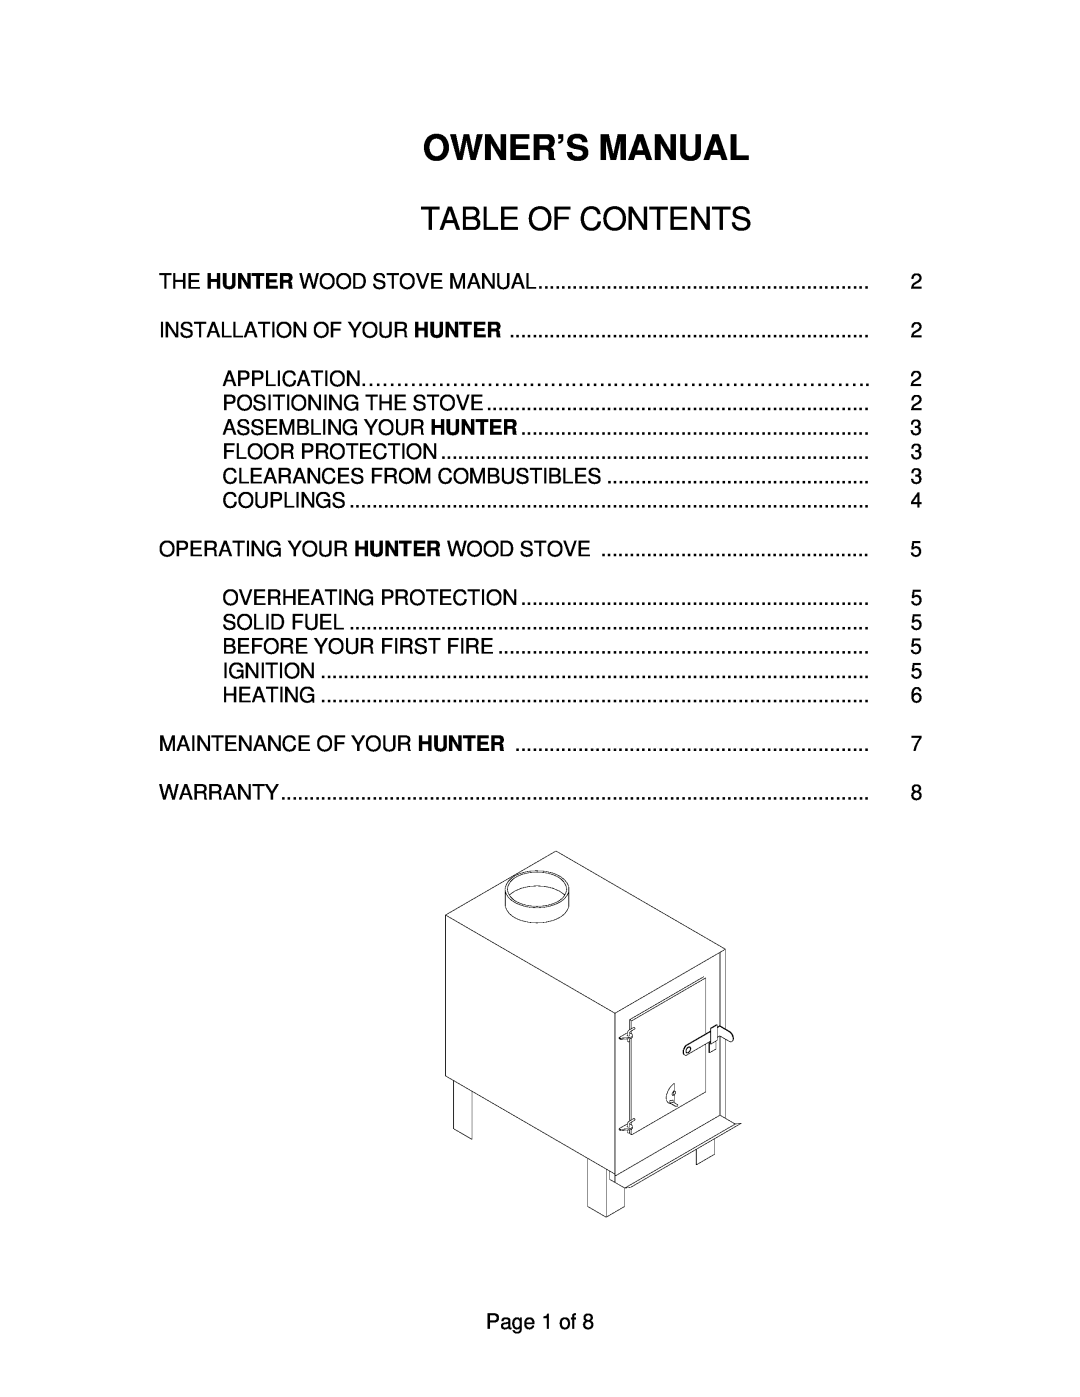 Drolet Hunter Wood Stove owner manual Table Of Contents 